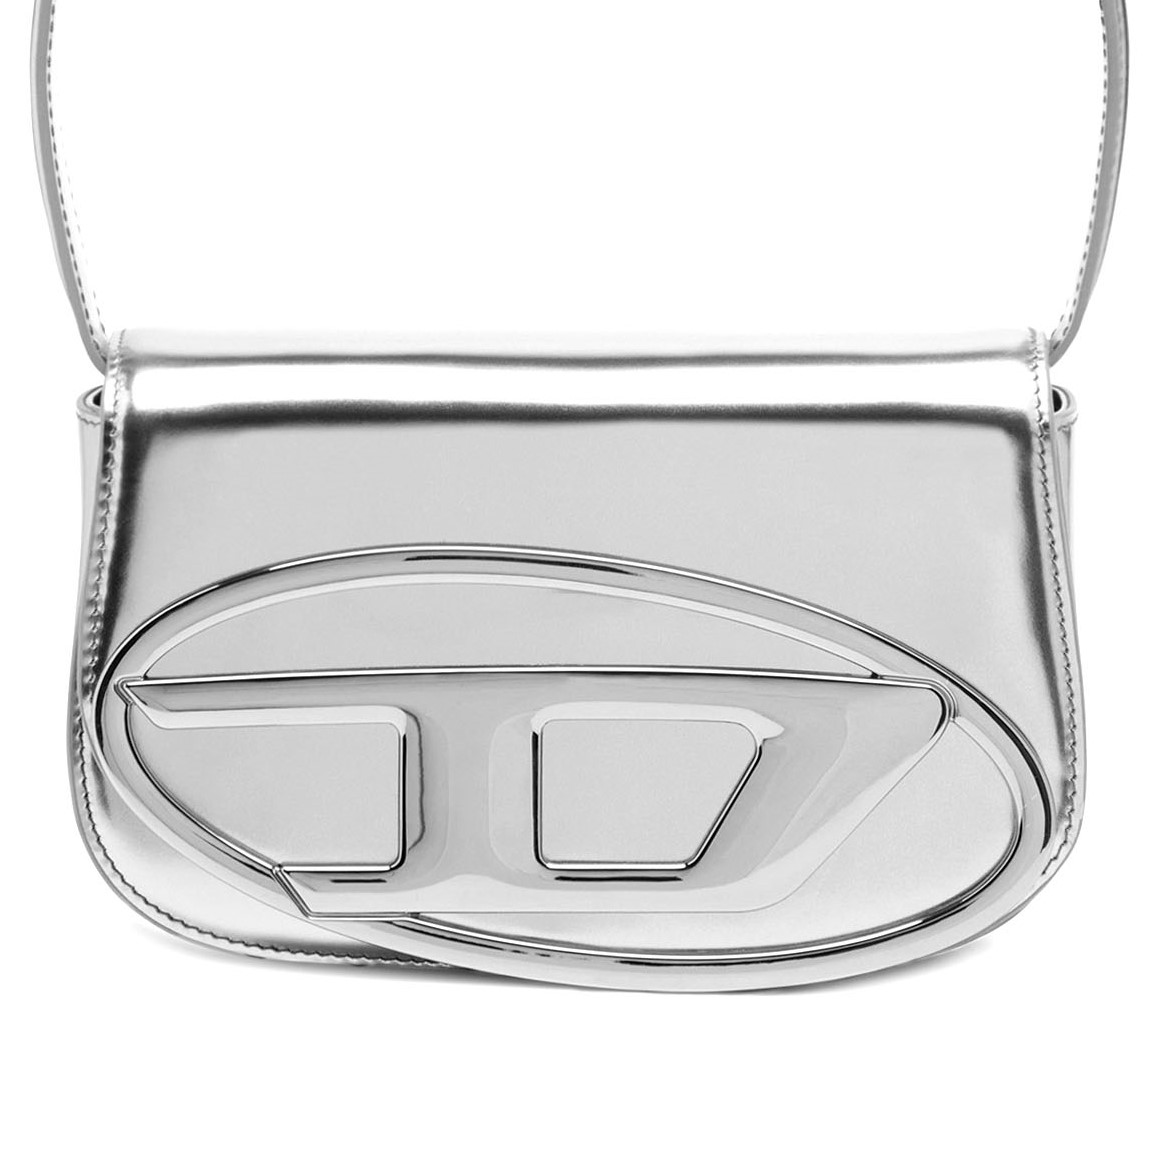 TÚI ĐEO VAI NỮ DIESEL WOMENS 1DR ICONIC SHOULDER BAG IN SILVER MIRRORED LEATHER MÀU BẠC 9